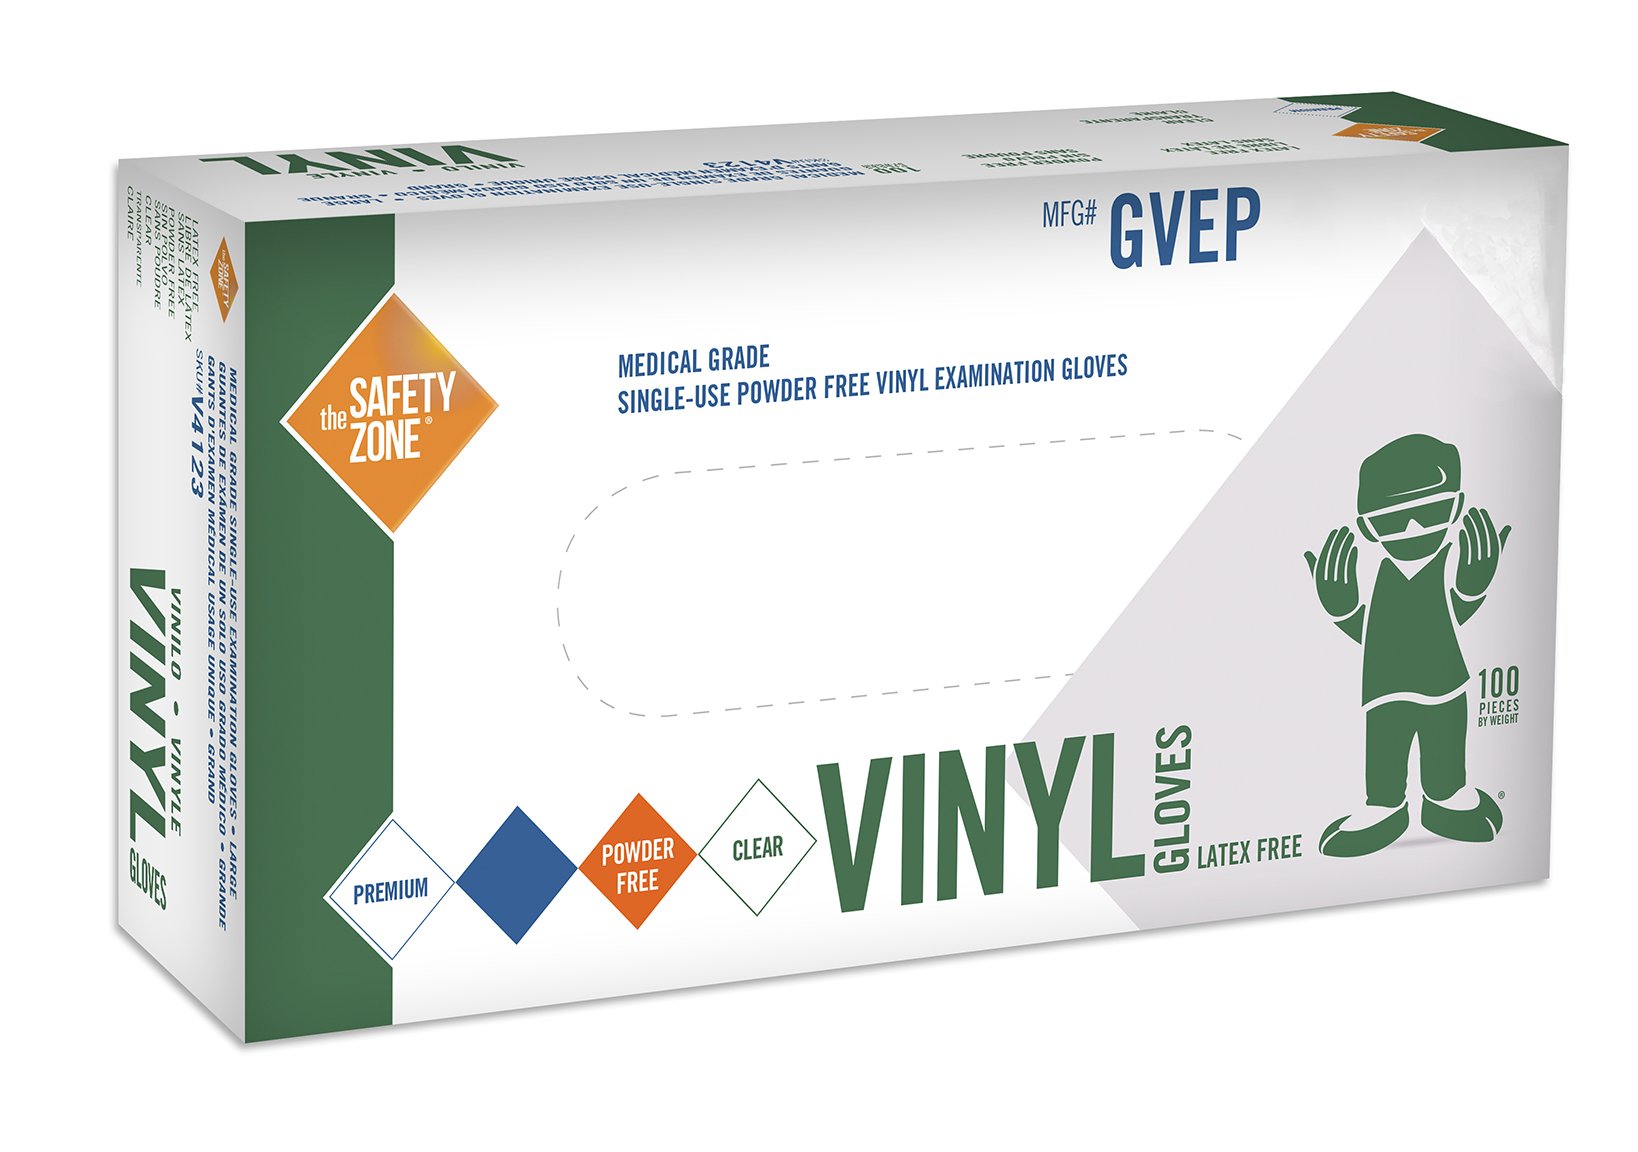 Disposable Vinyl Exam Gloves - Clear, Medical Grade, Powder Free, Latex Free, Lab Work, Plastic, Food, Cleaning, Wholesale Cheap, Size Large (Box of 100)